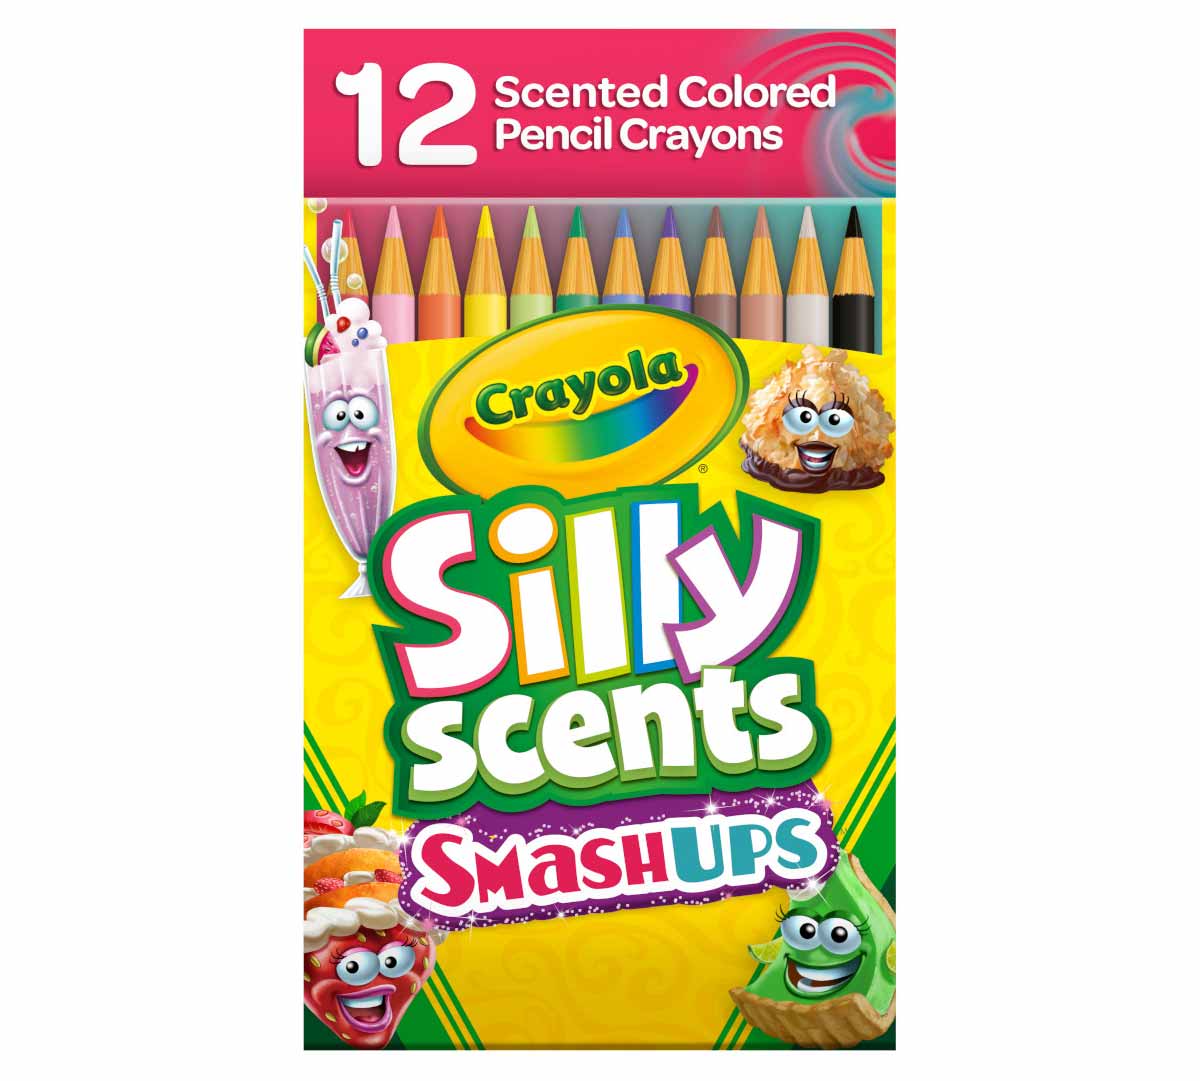 https://shop.crayola.com/on/demandware.static/-/Sites-crayola-storefront/default/dw0a7e0712/images/68-2118_Silly-Scents-Smash-Ups-Colored-Pencils-12ct_PDP_01.jpg